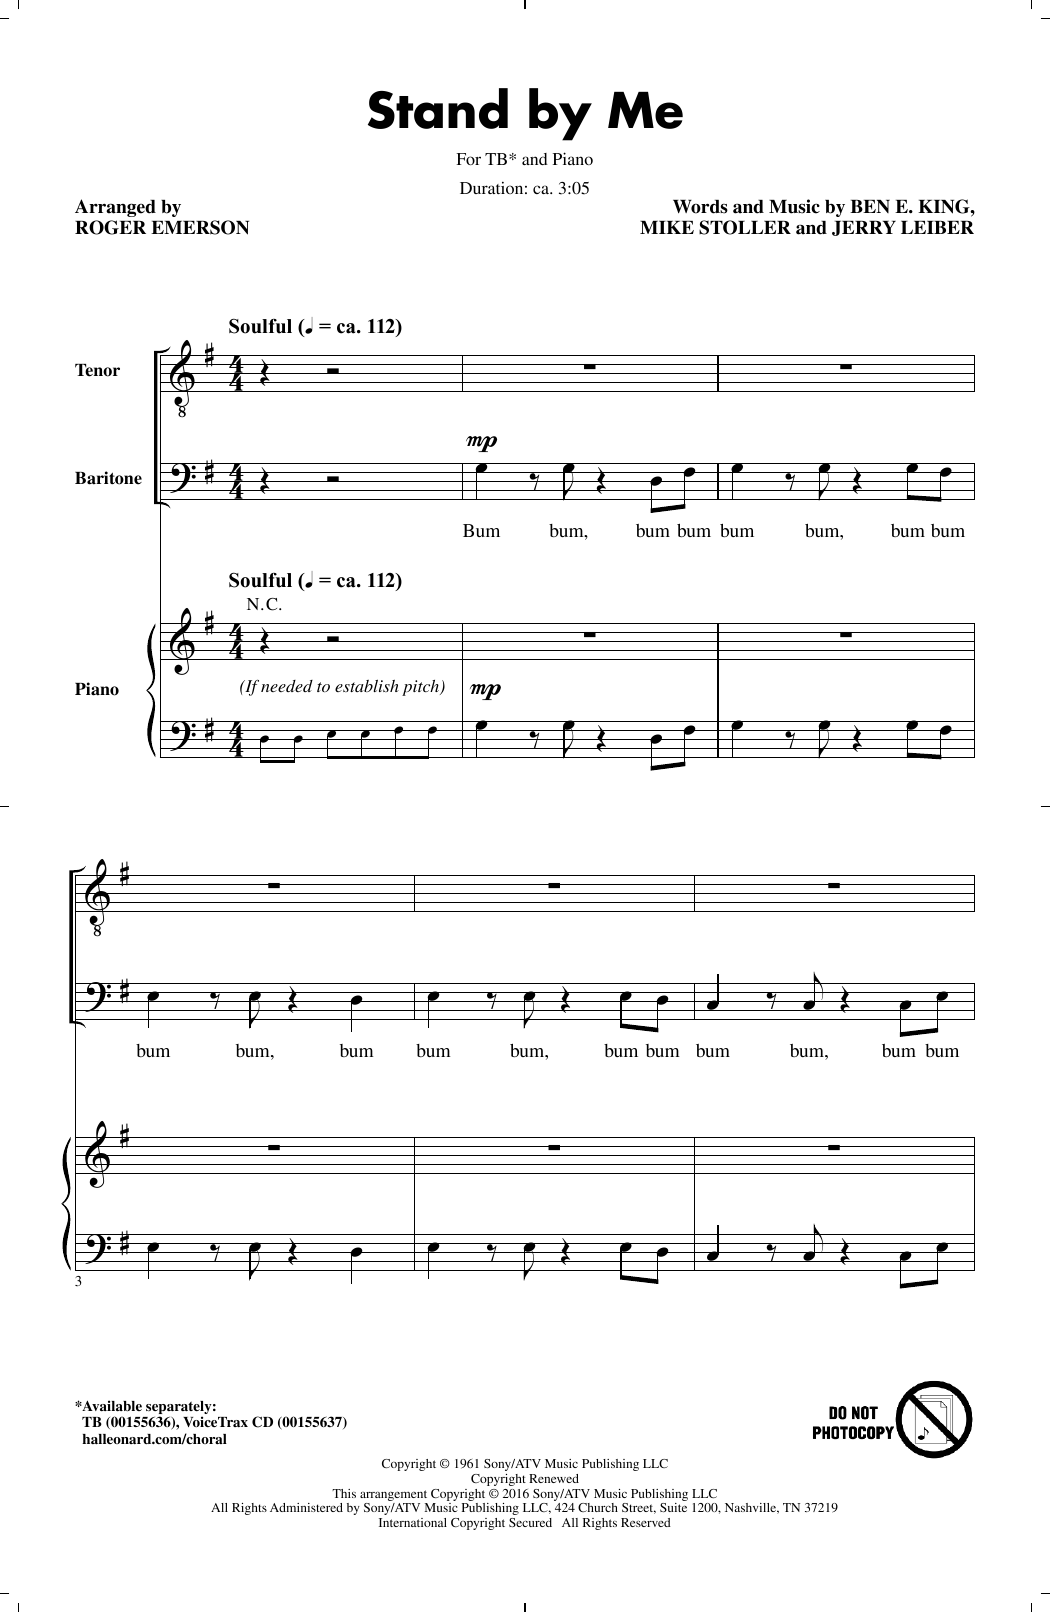 Download Ben E. King Stand By Me (Arr. Roger Emerson) Sheet Music